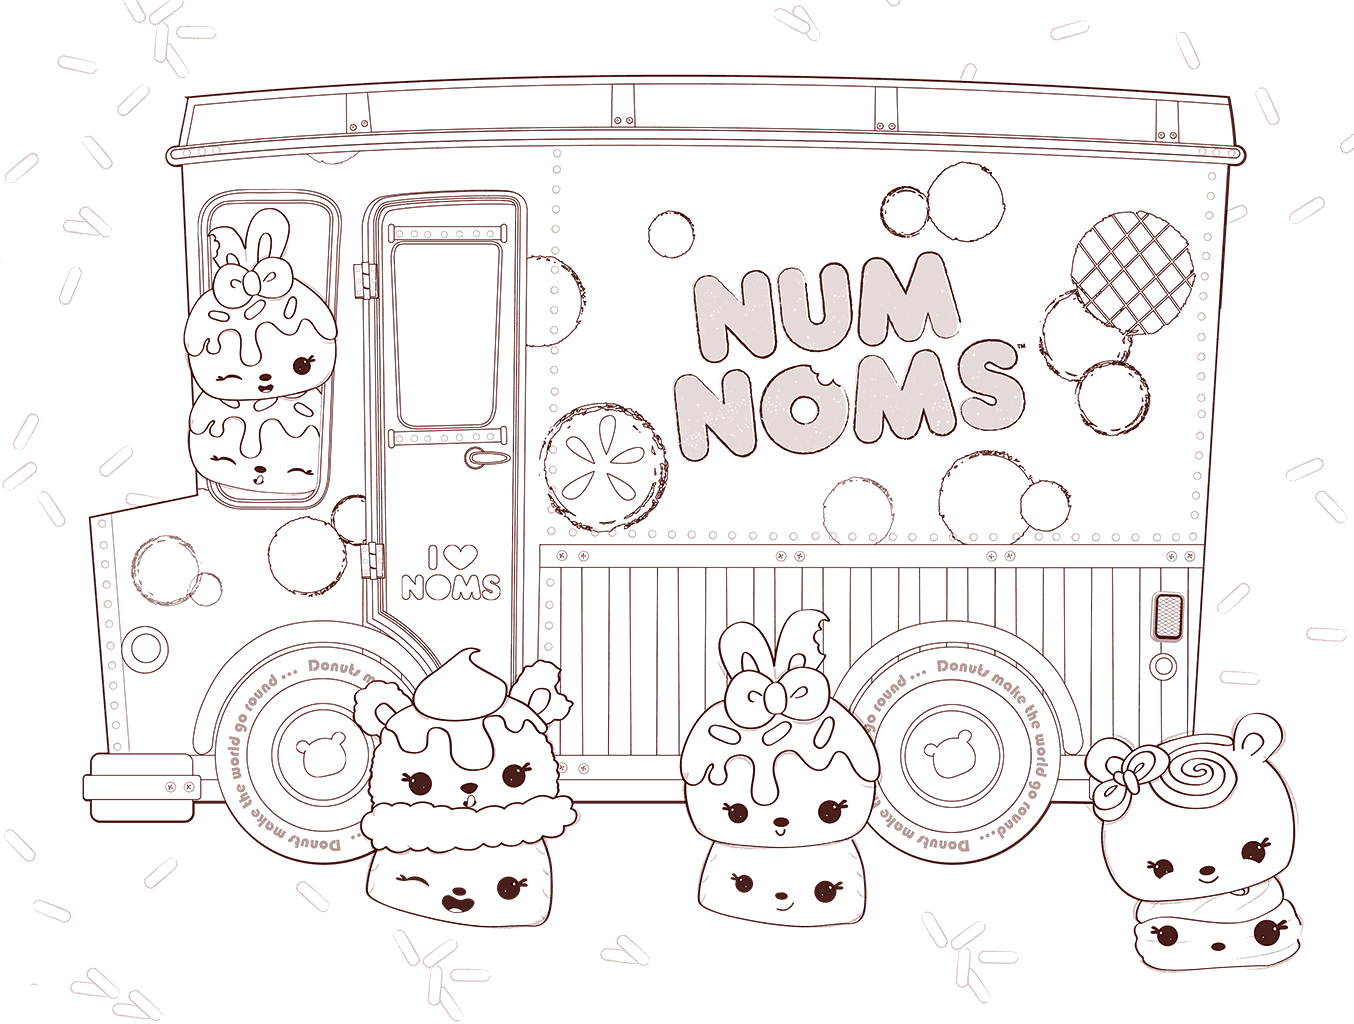 https://www.bestcoloringpagesforkids.com/wp-content/uploads/2019/02/Num-Noms-Coloring-Pages.png